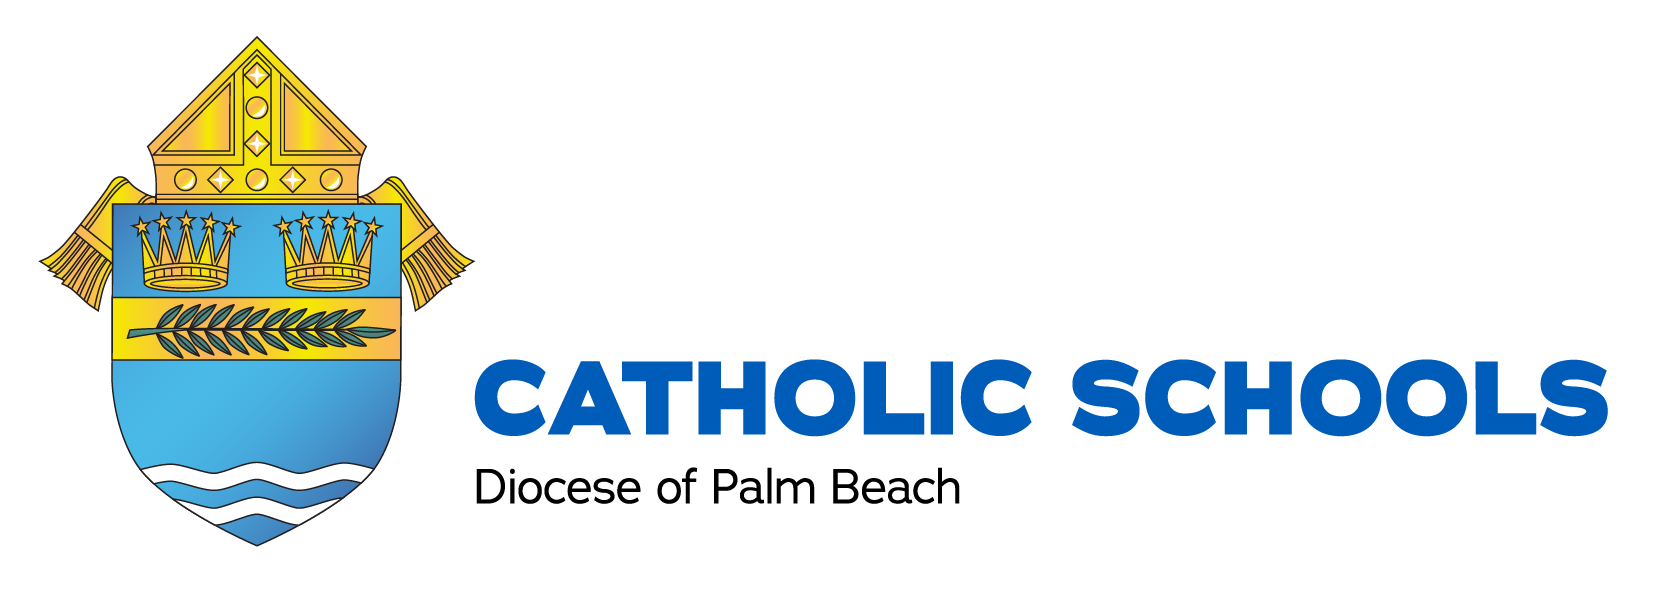 palm-beach-diocese-catholic-schools-logo-with-text